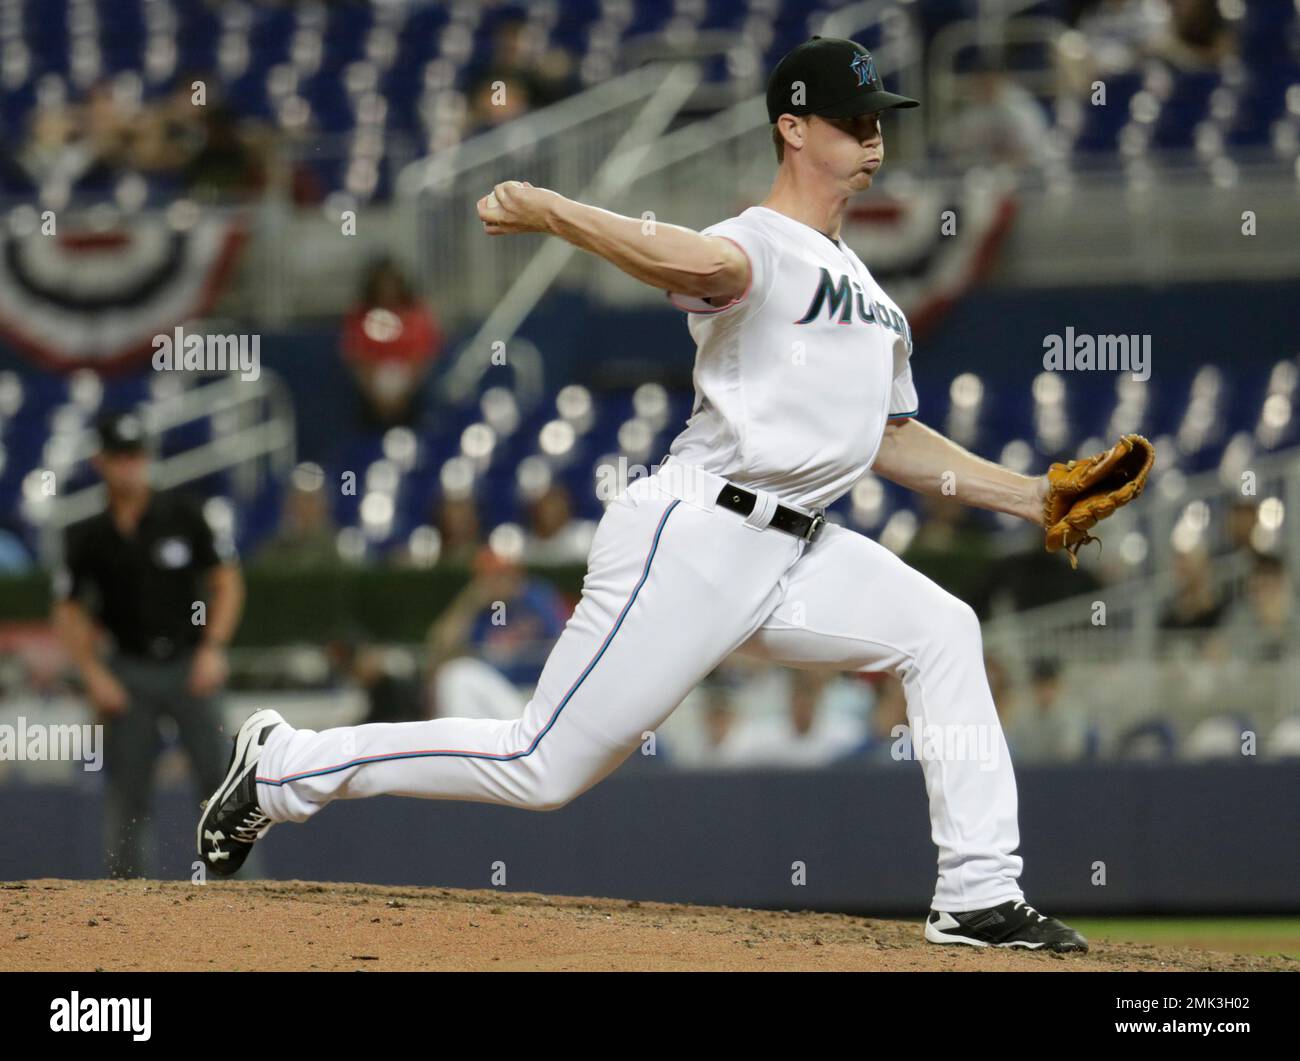 MIAMI, FL - AUGUST 26: Los Angeles Dodgers relief pitcher Alex Vesia (51)  pitches in relief for the Dodgers during the game between the Los Angeles  Dodgers and the Miami Marlins on